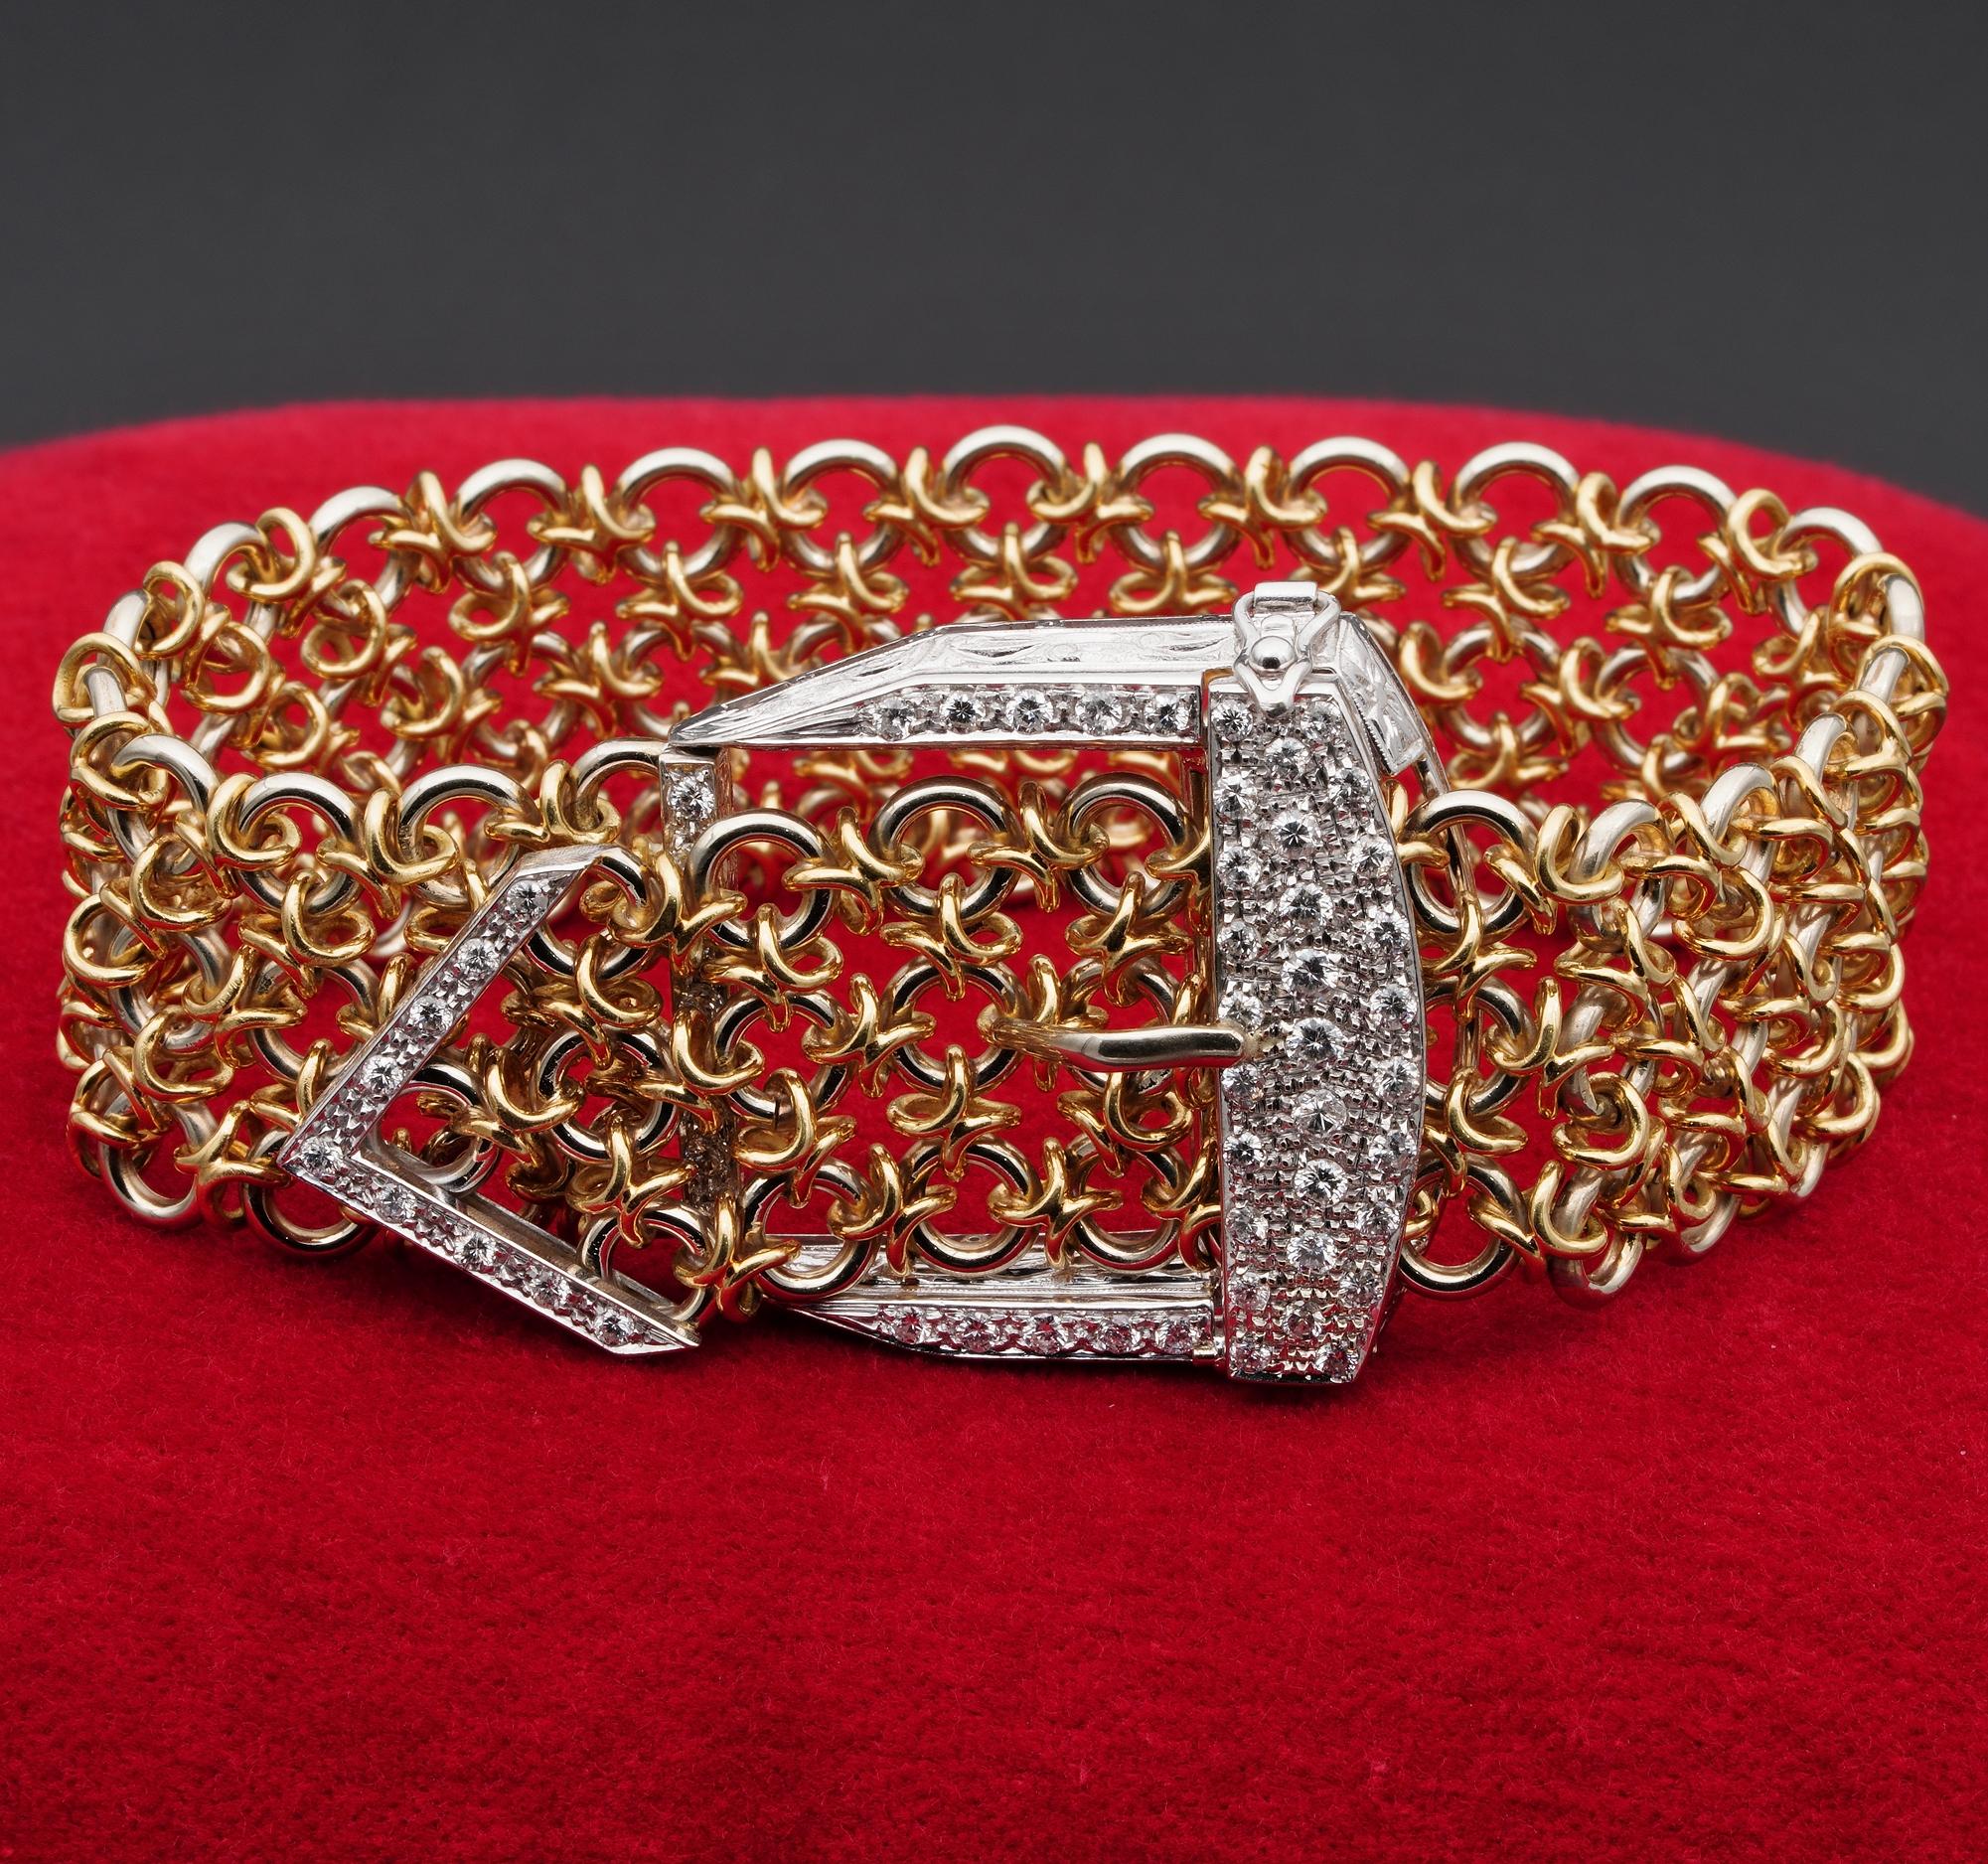 This  exceptionally hand crafted Retro Italian Bracelet is of solid 18 Kt gold
Boasts a very special hand wrought, like knitted gold wires, weighing 55.6 grams – completed with a geometric beautiful designed Diamond Buckle loaded with bright white